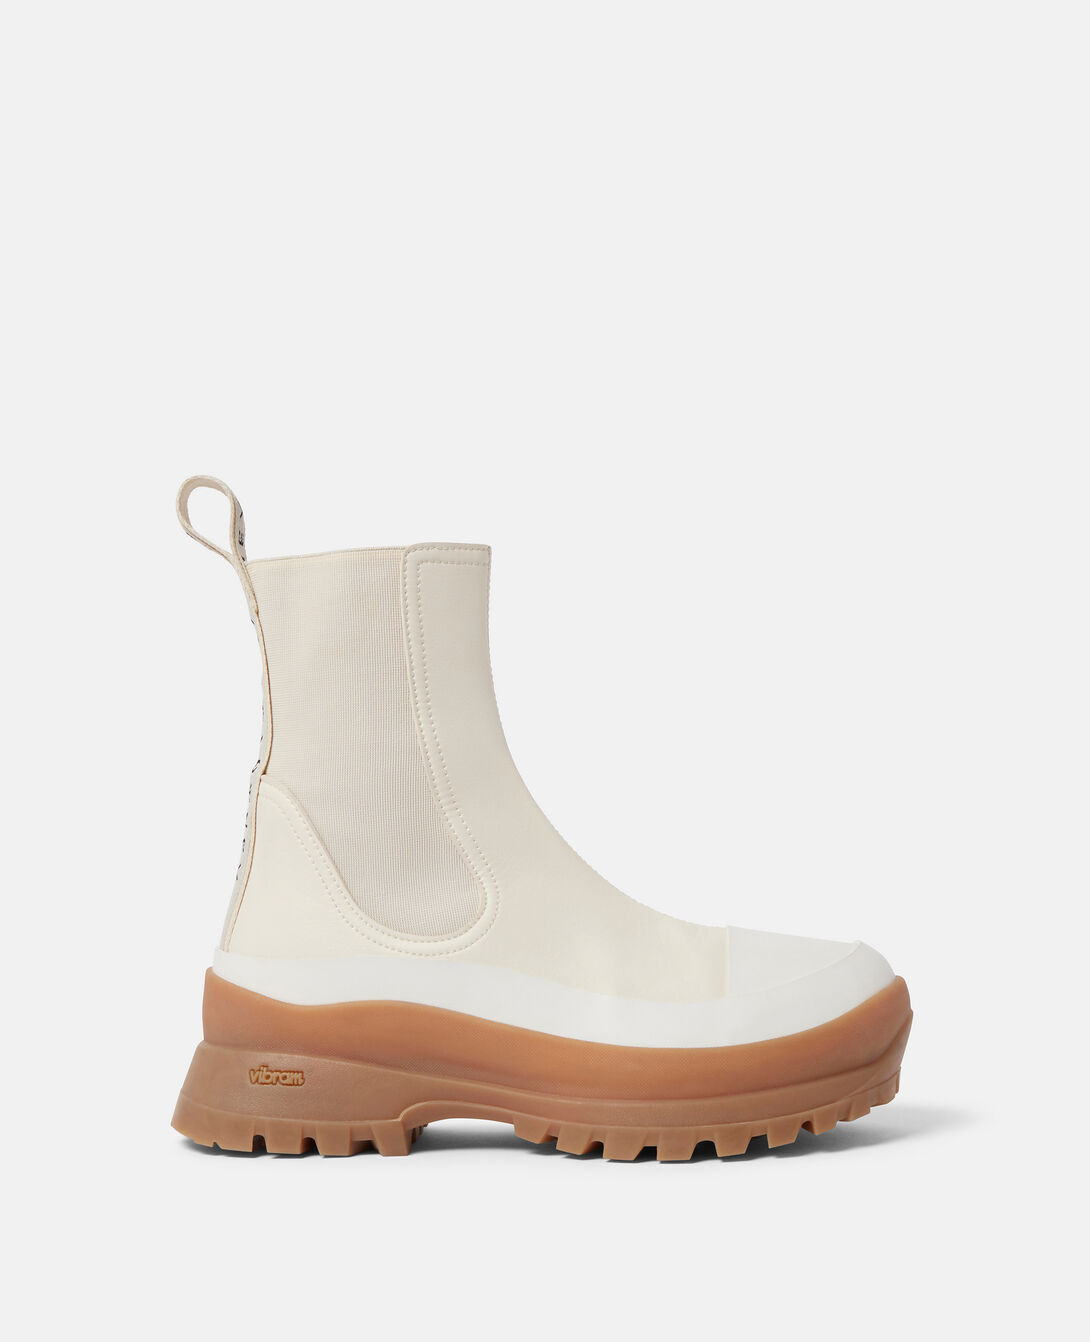 Stella McCartney x Hunter produces a pair of sustainable boots